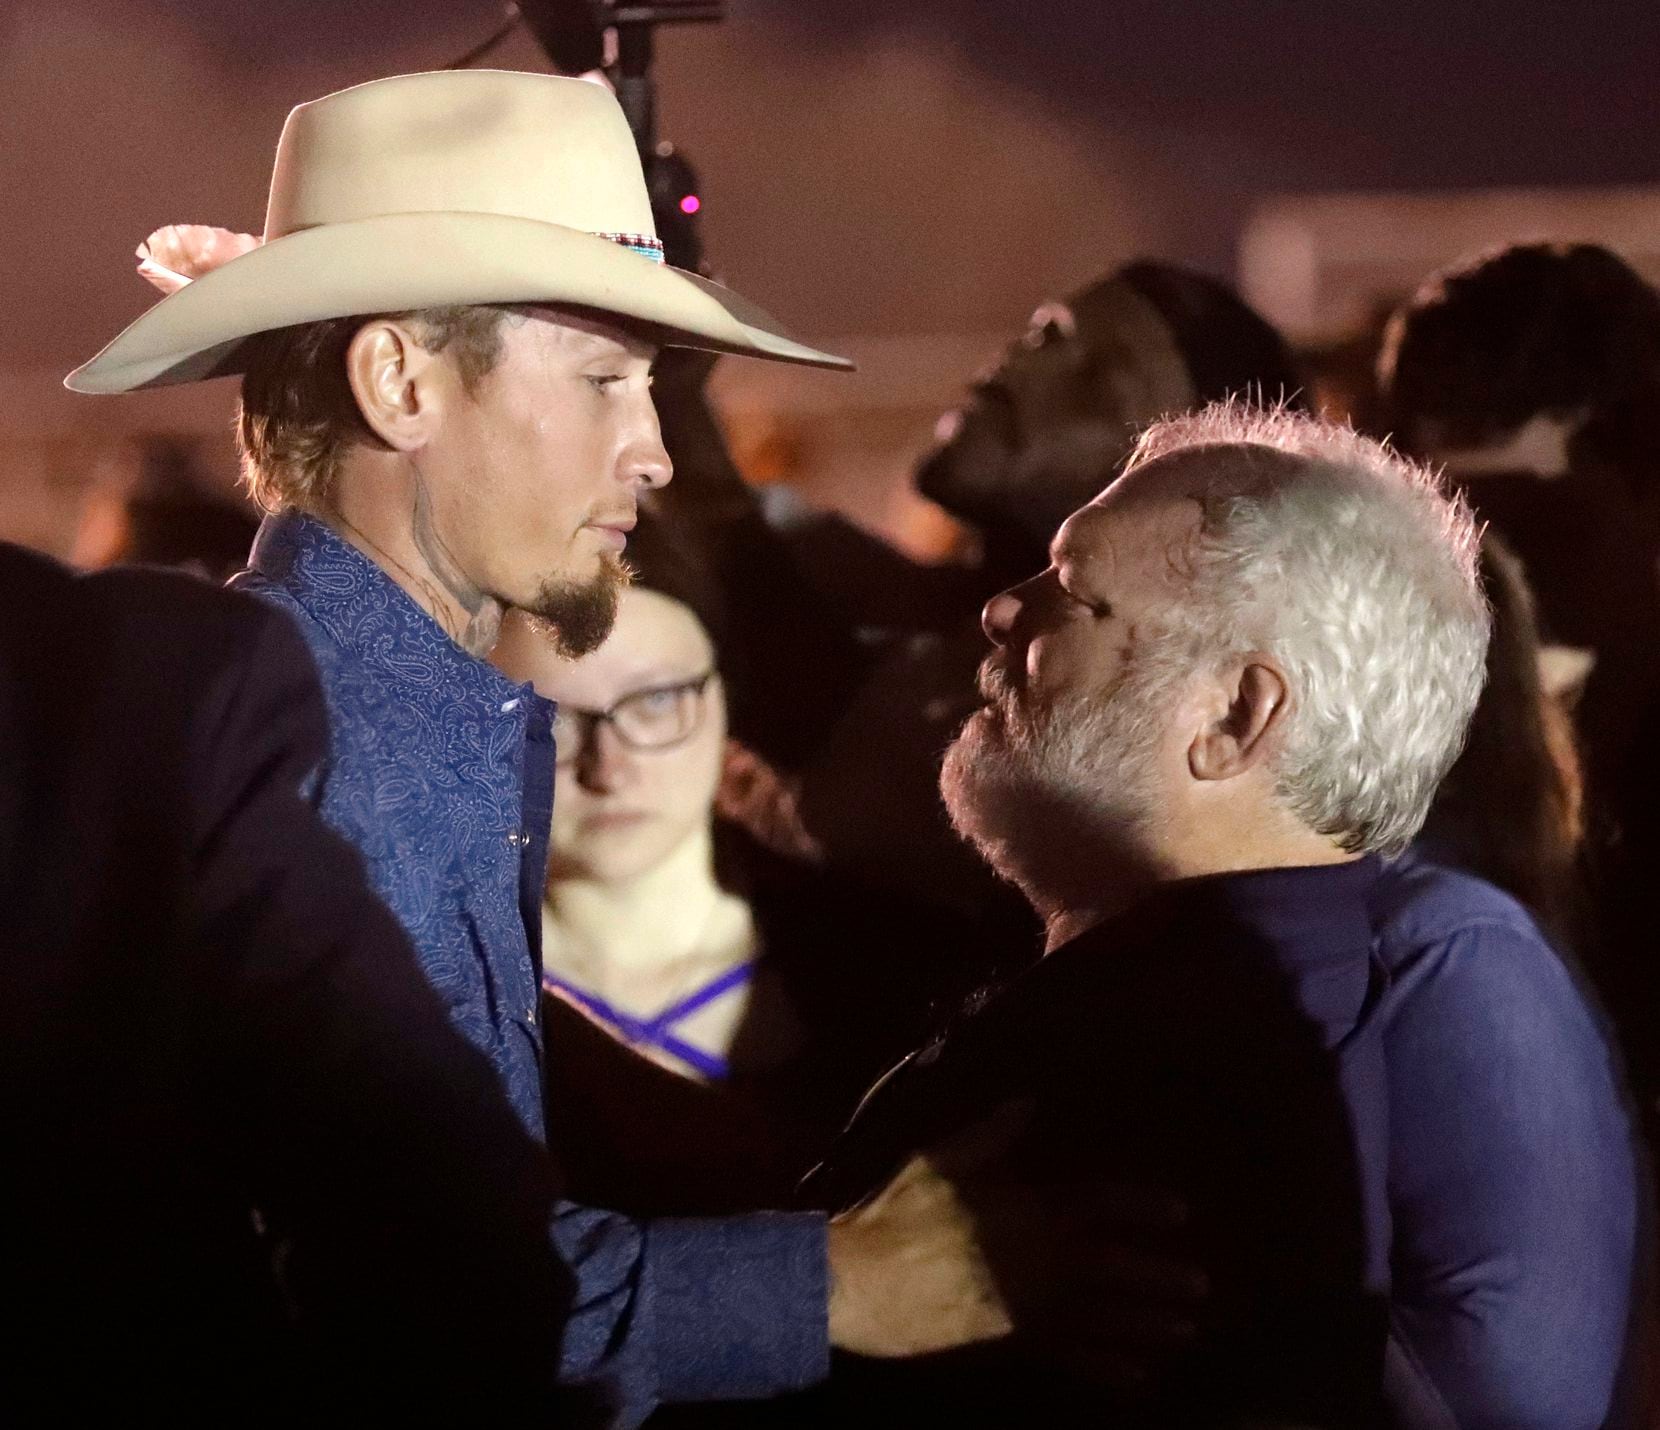 Stephen Willeford, right, hugs Johnnie Langendorff during a vigil for the victims of the First Baptist Church shooting Monday, Nov. 6, 2017, in Sutherland Springs, Texas. 